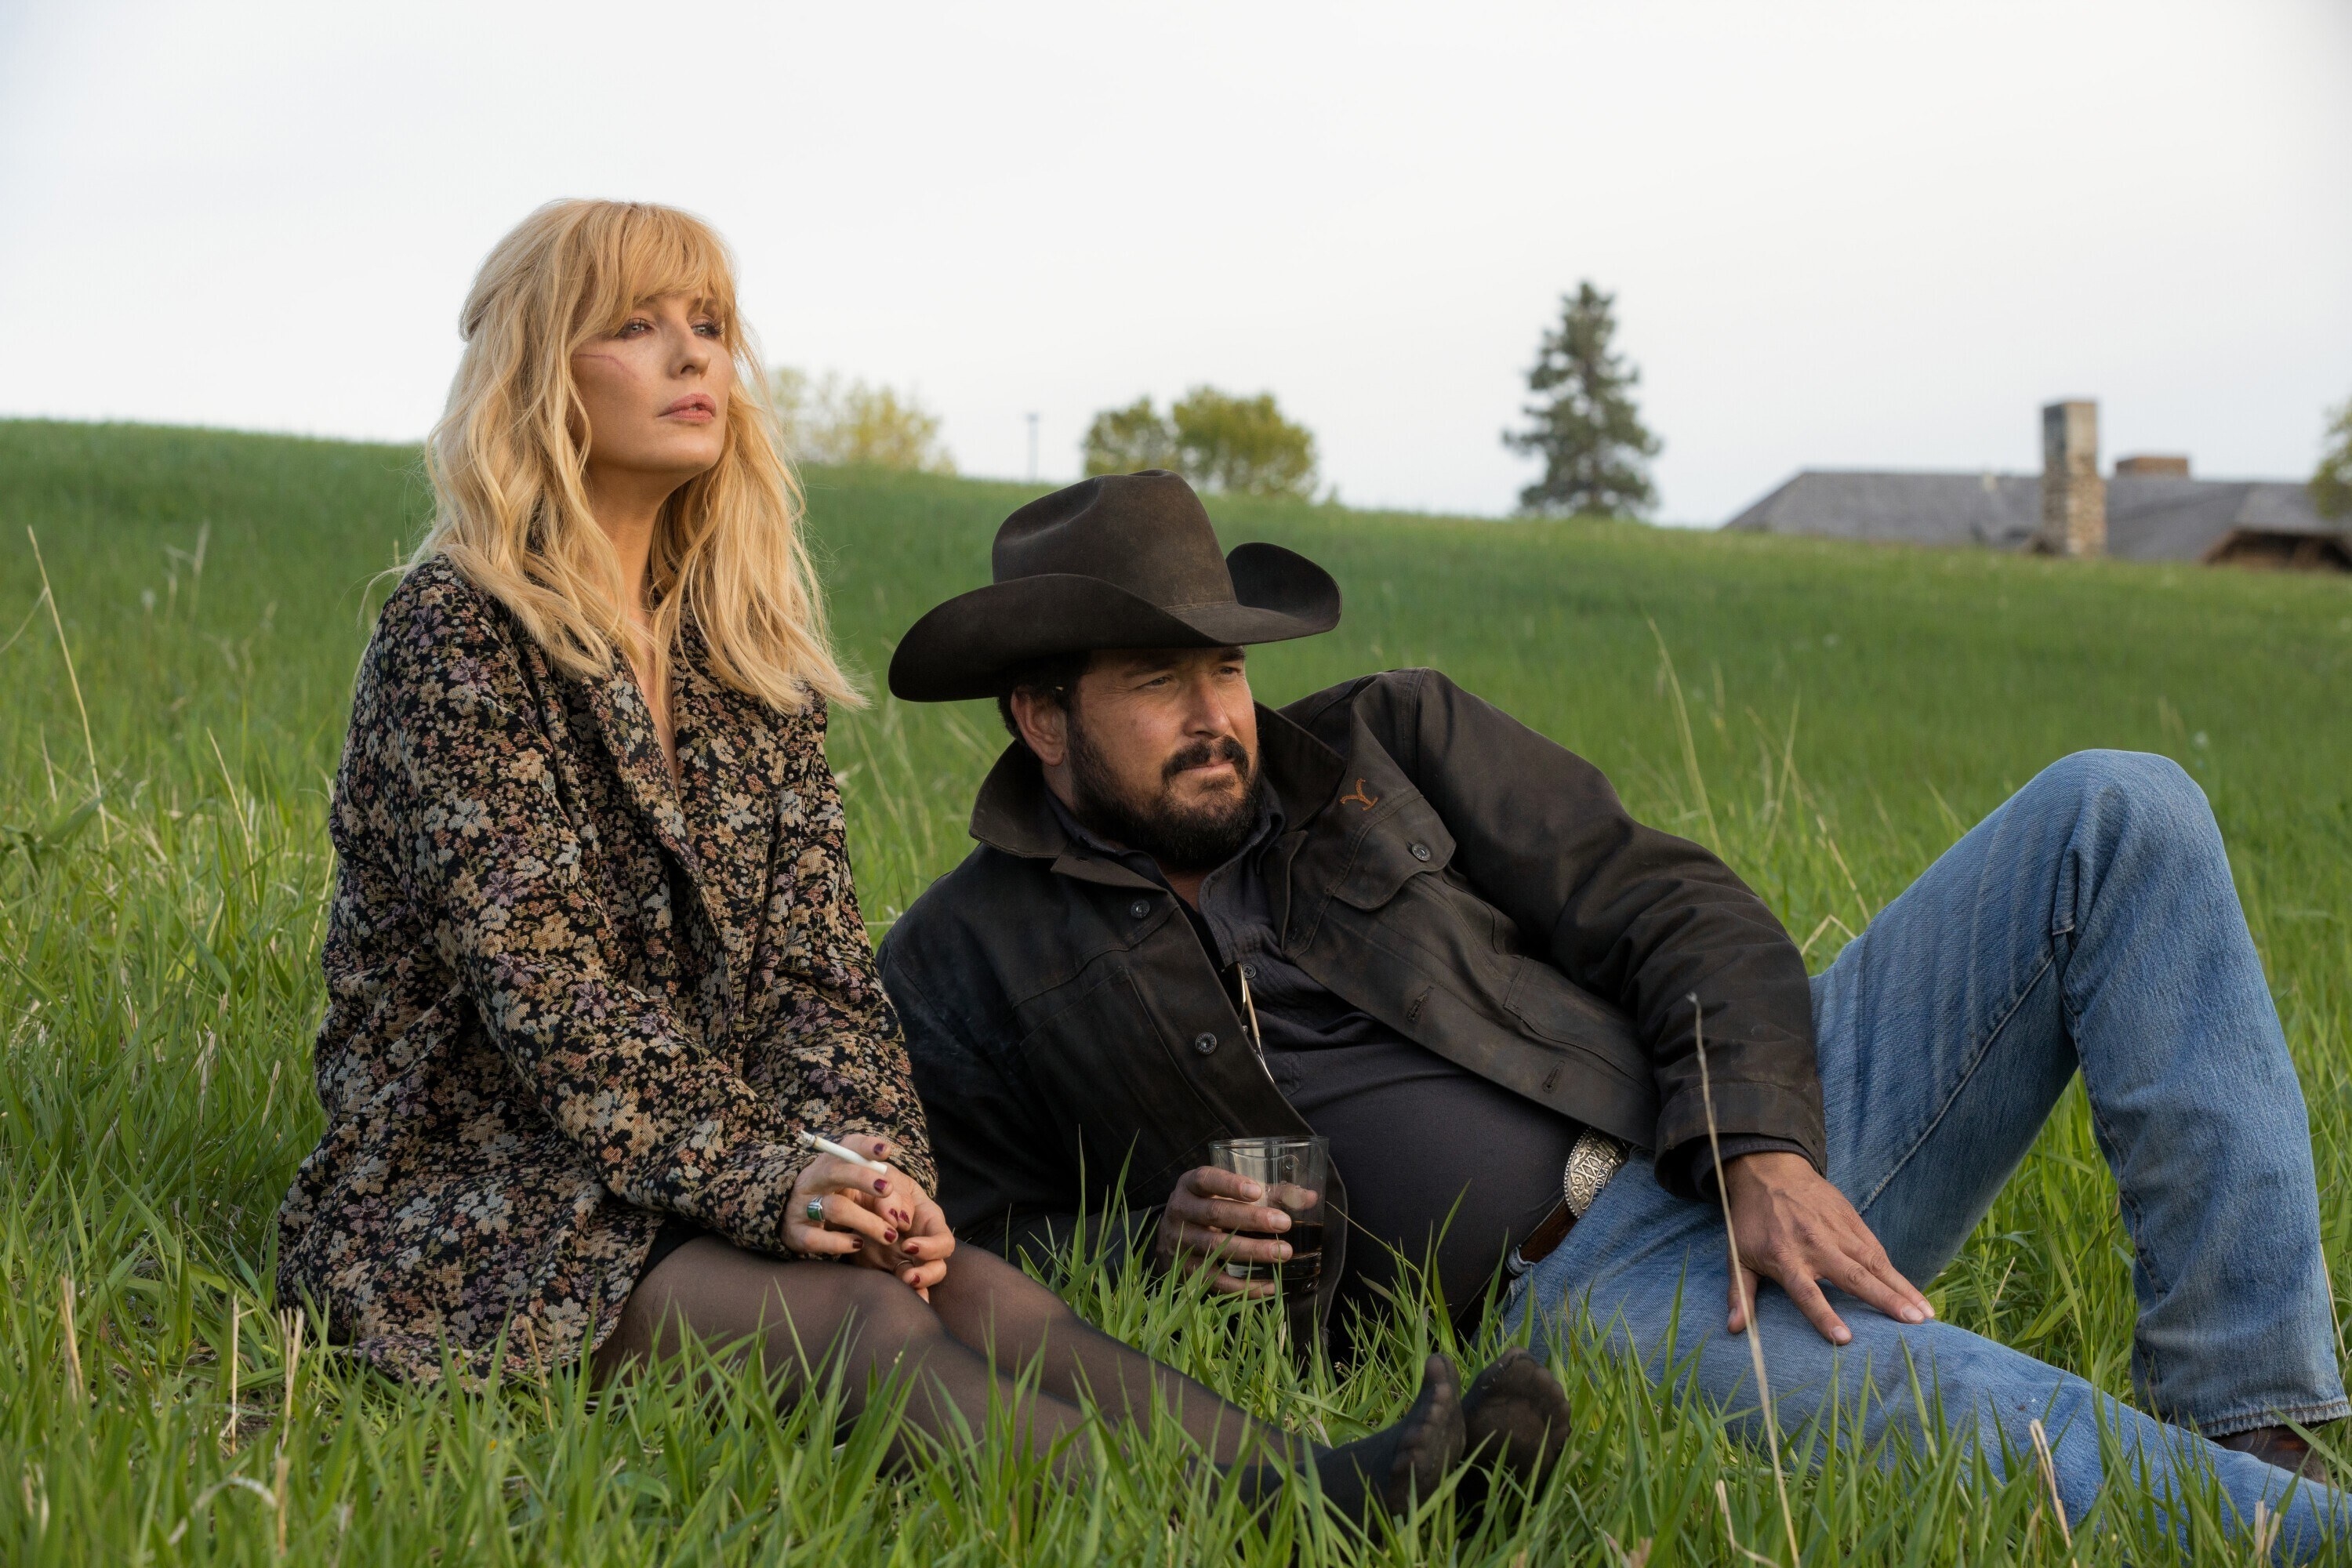 Kelly Reilly and Cole Hauser in Yellowstone